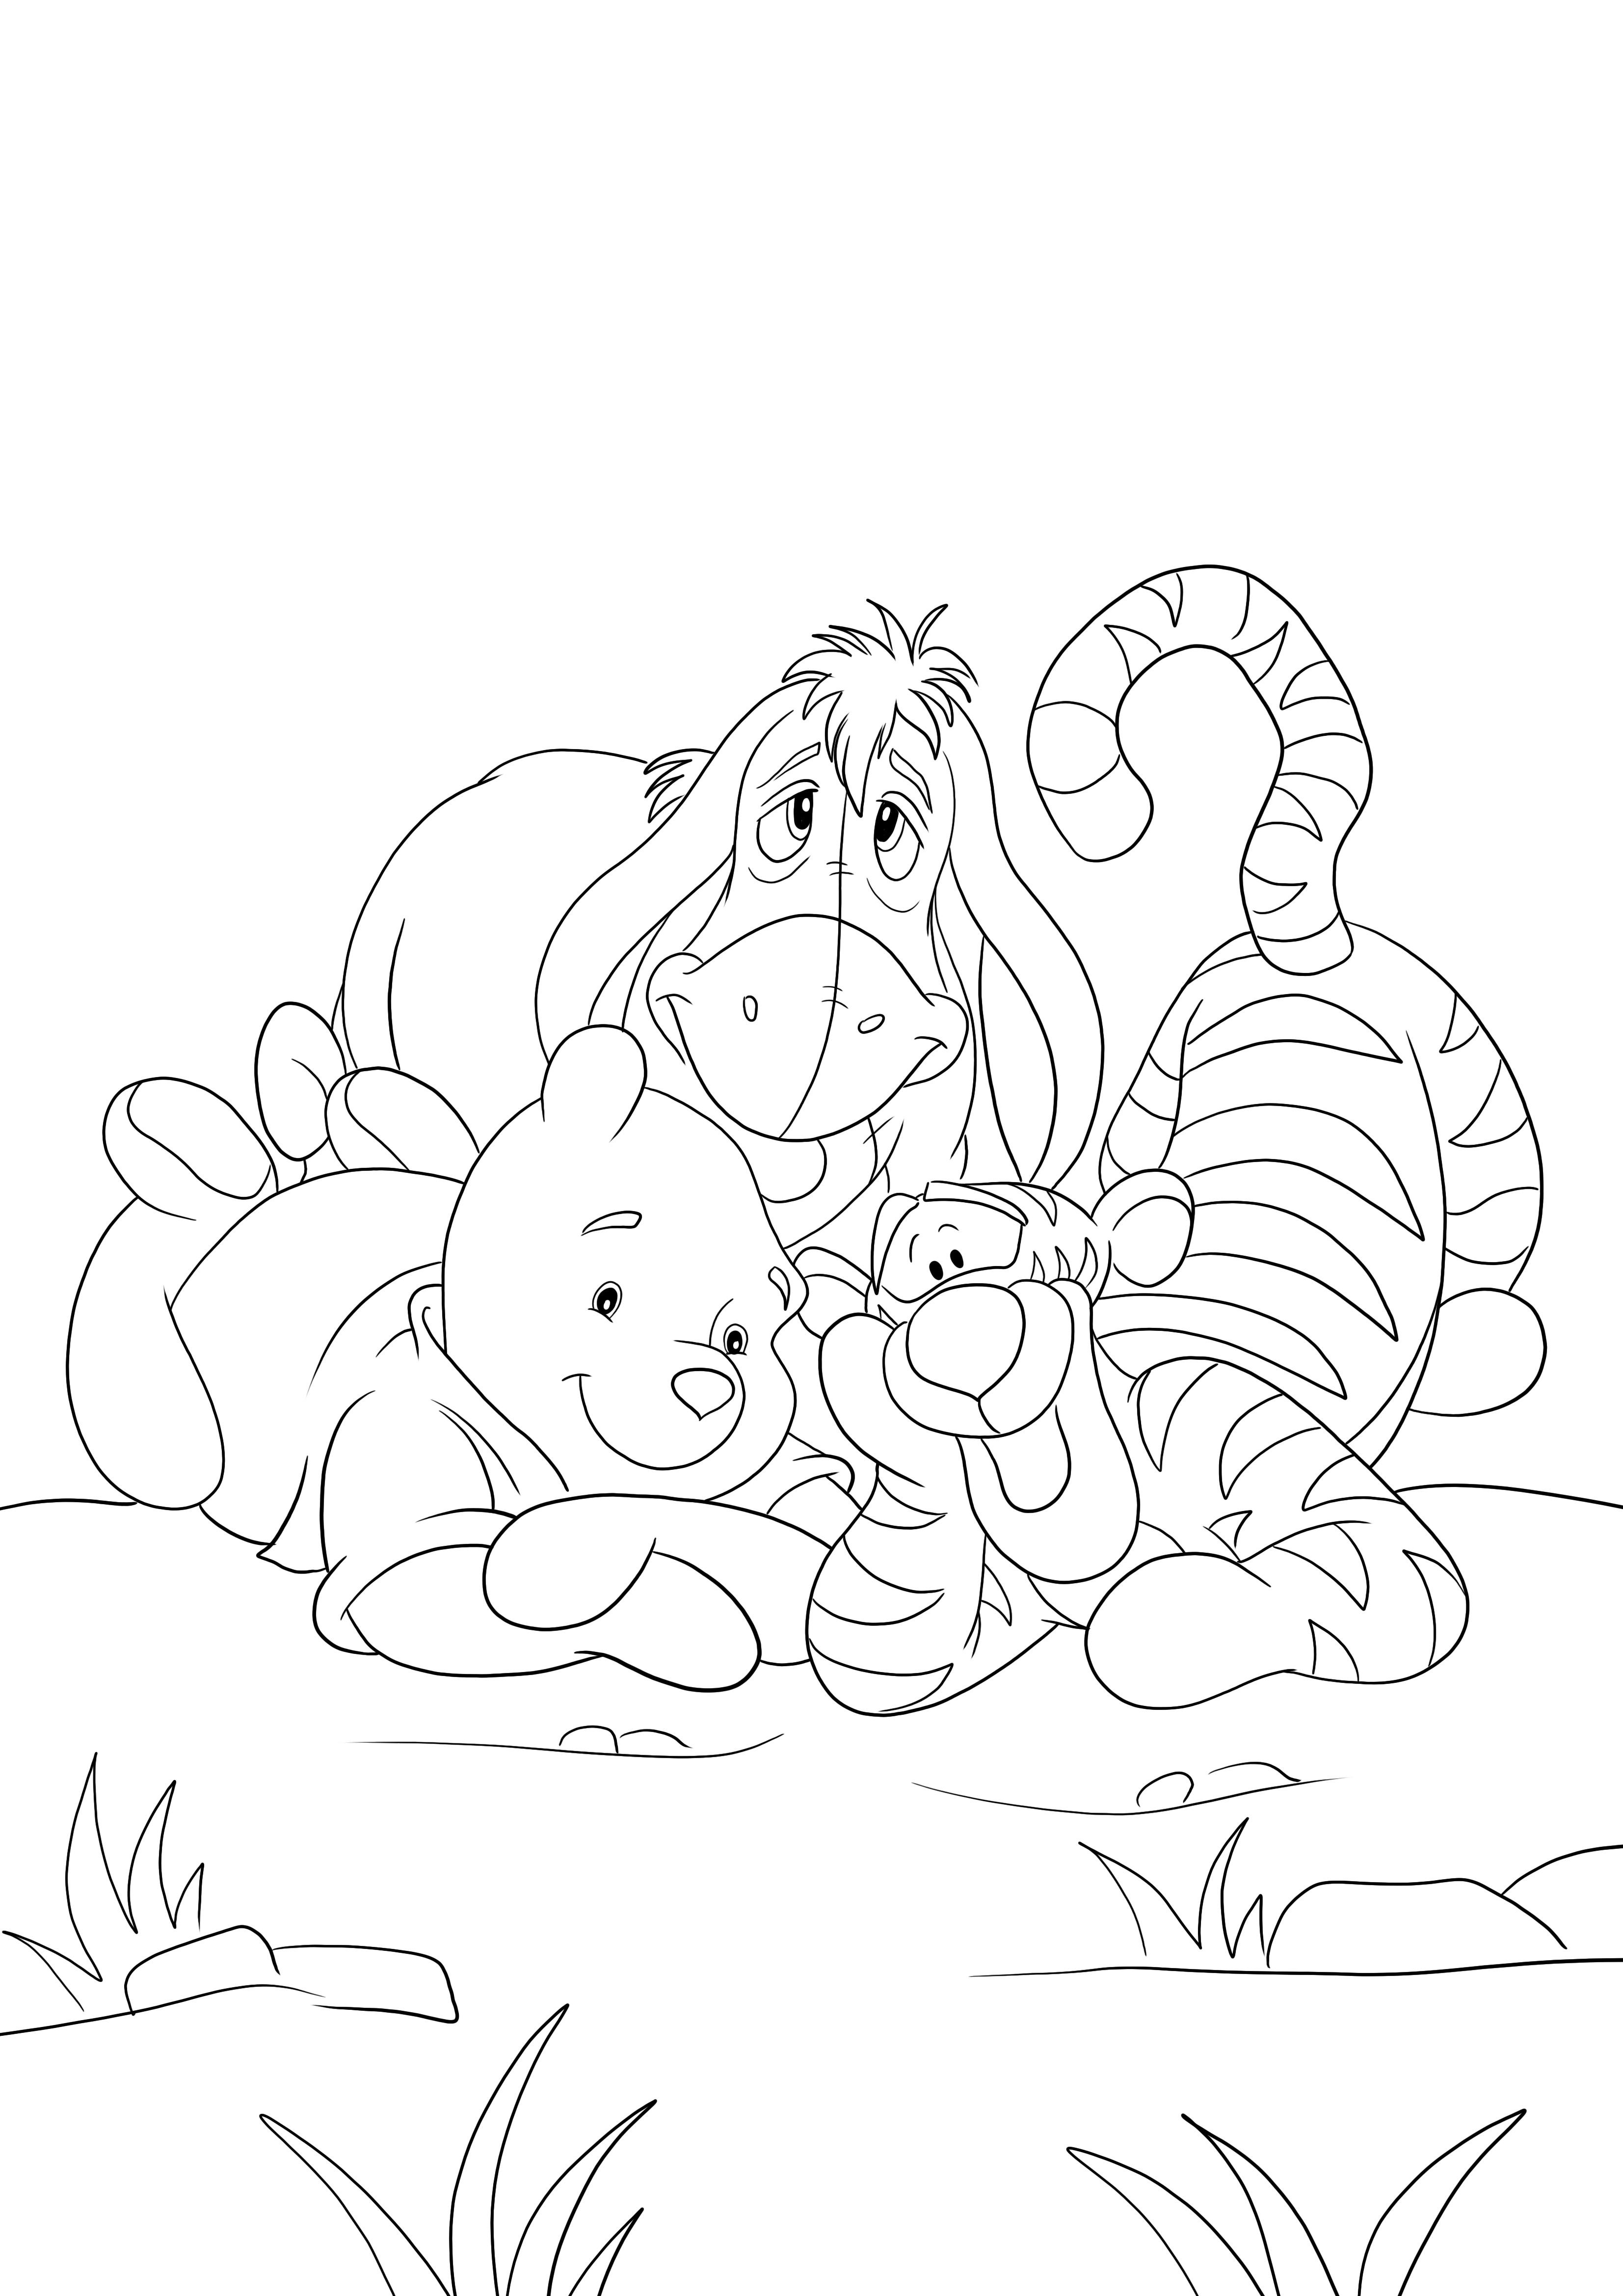 Winnie-Eeyore-Tiger best friends-free to download and easy to color picture.